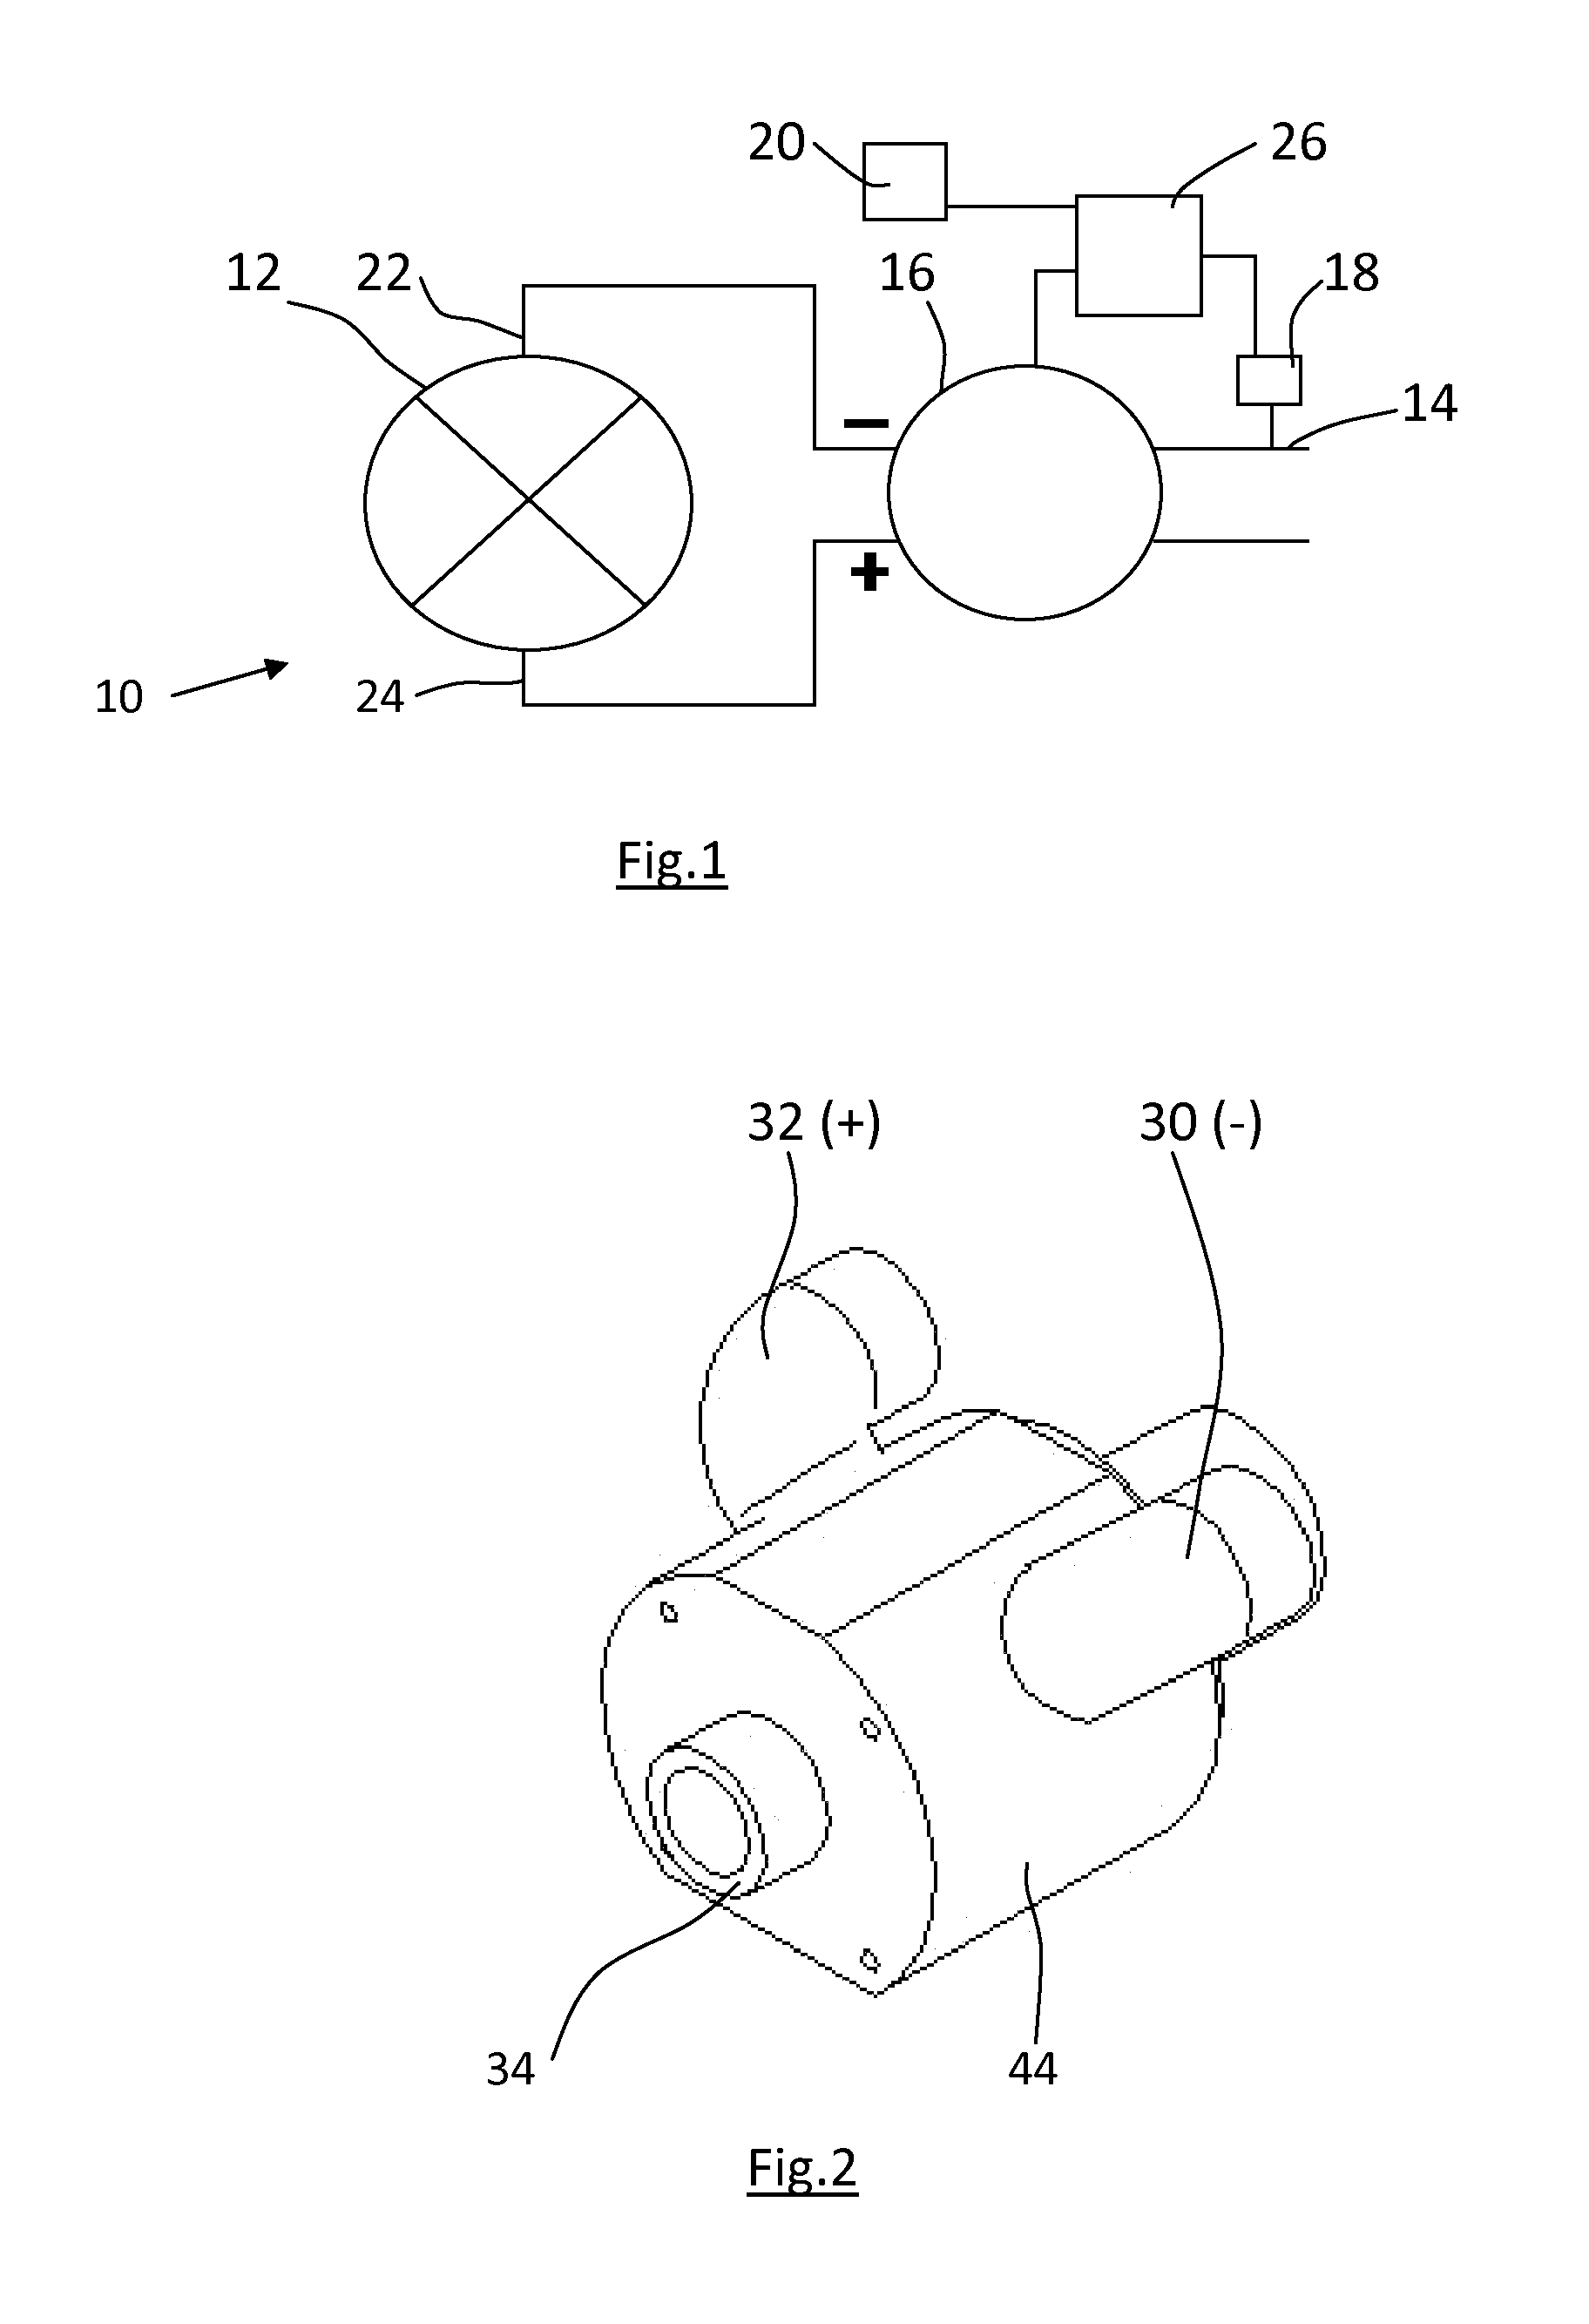 Treatment device and method of use